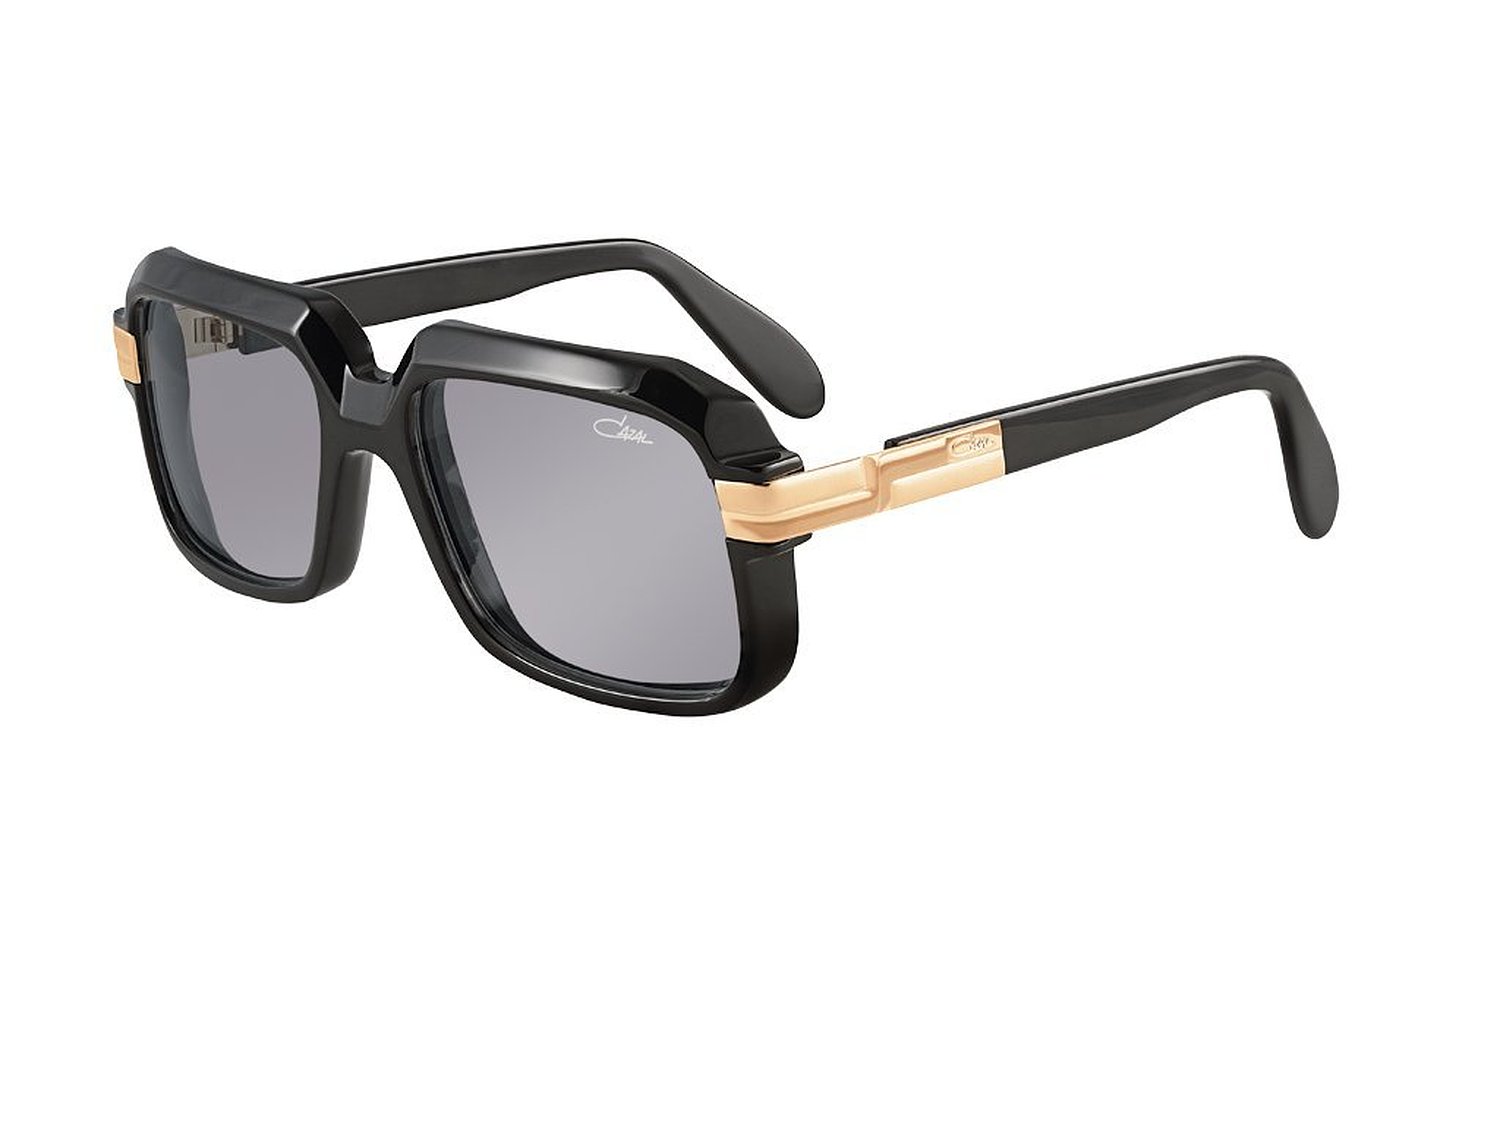 Cazal Schwarz Sonnebrille Sunglasses with Black Frames and Gold Accents